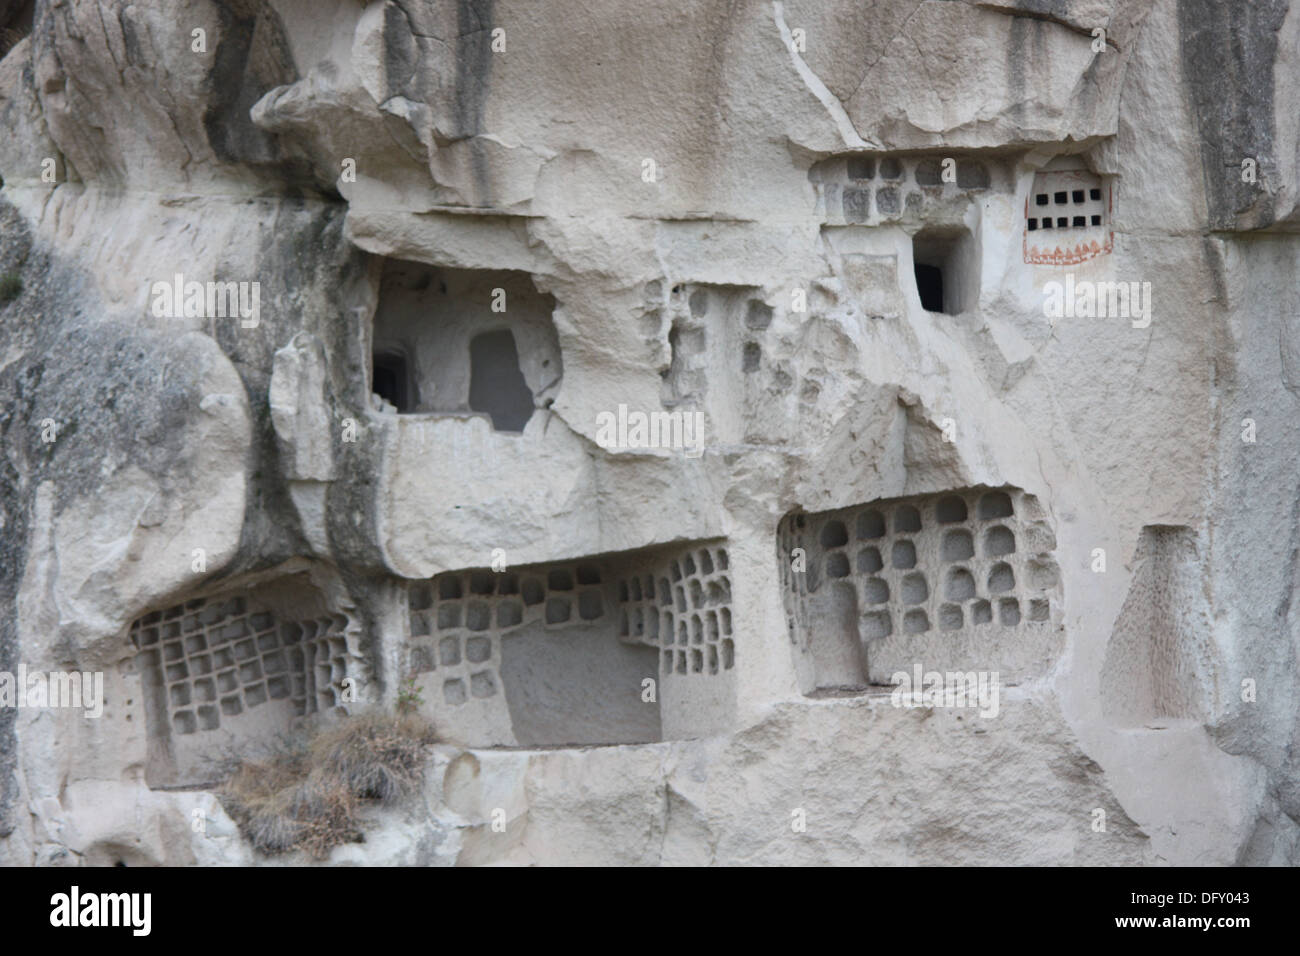 Rooms and houses carved out of the rock face in Goreme in Turkey. Stock Photo